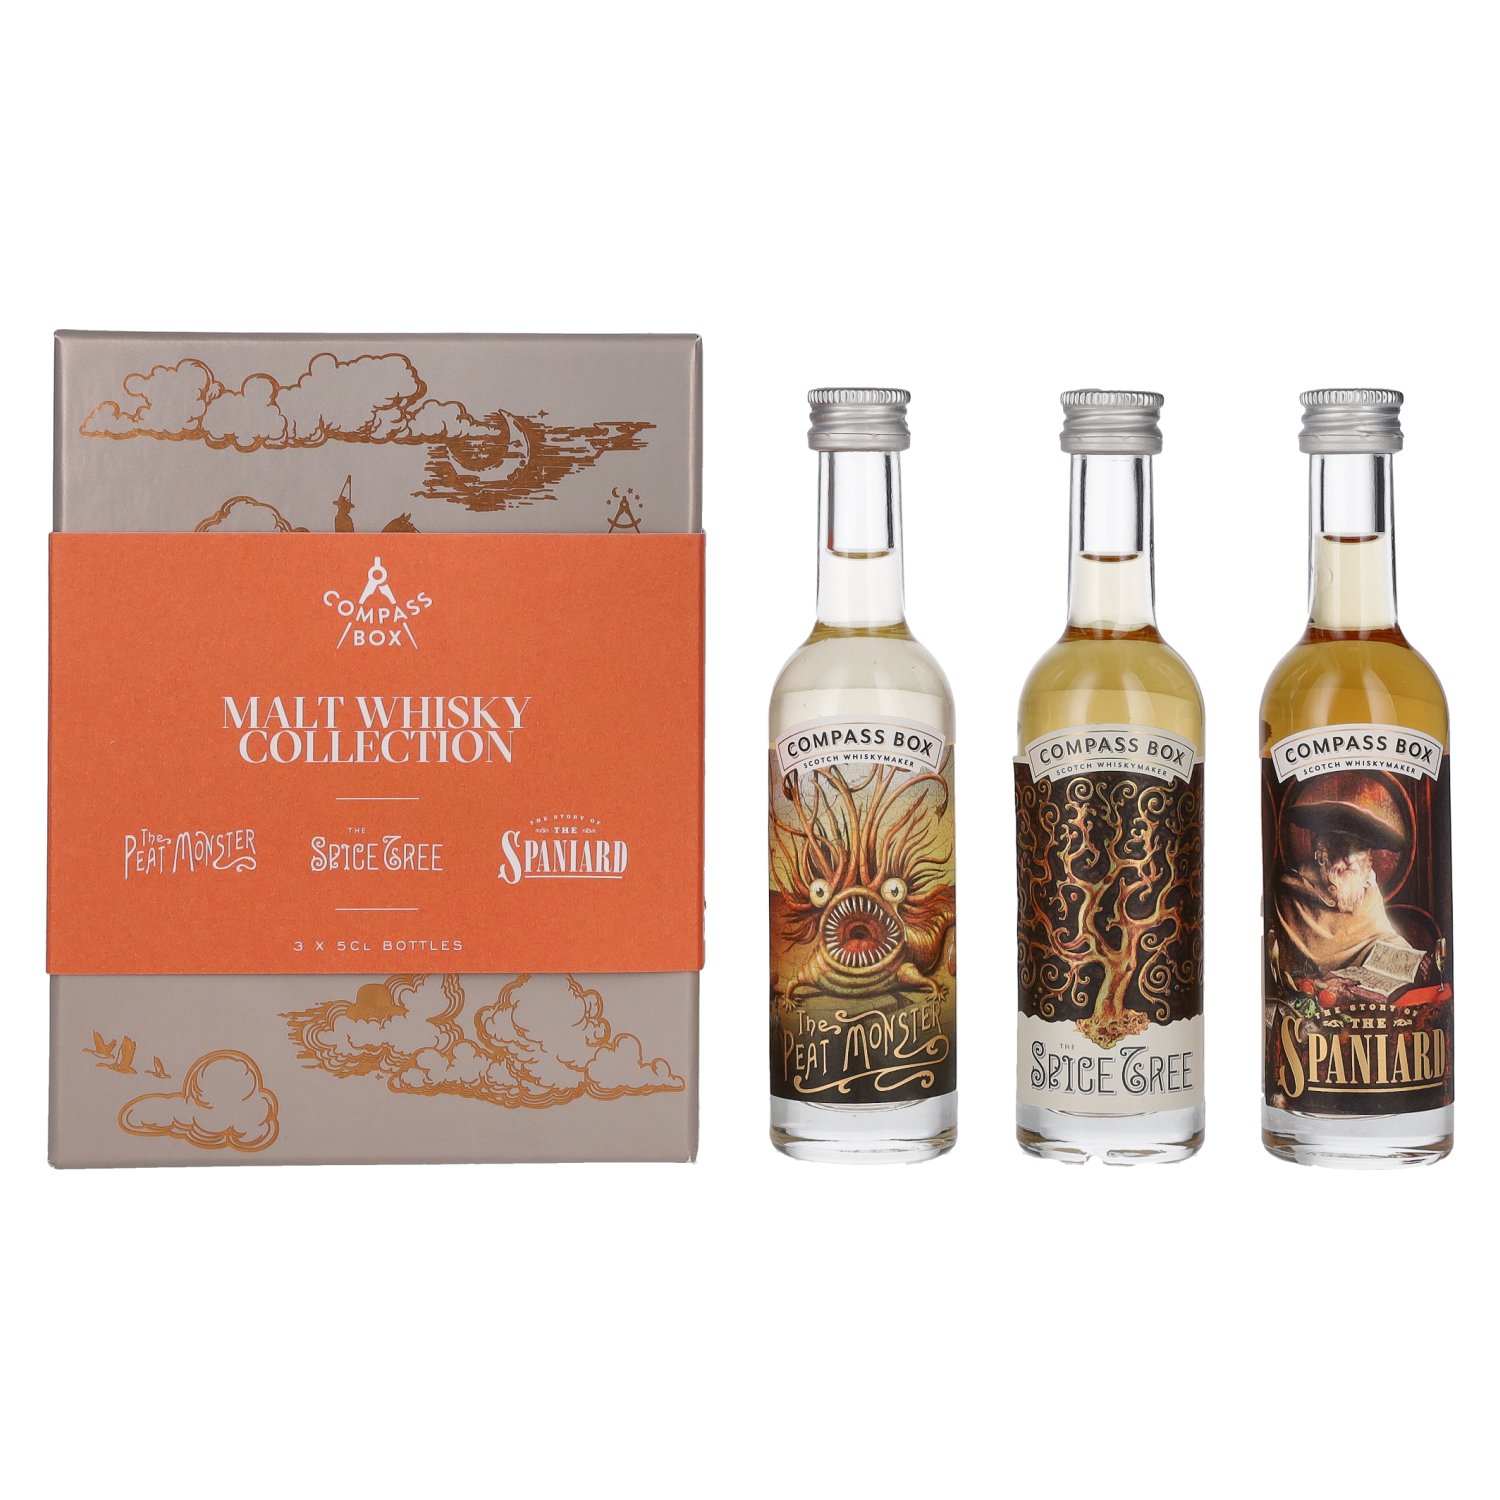 Compass Box Blended Malt Whisky Collection 45% 3x0,05L